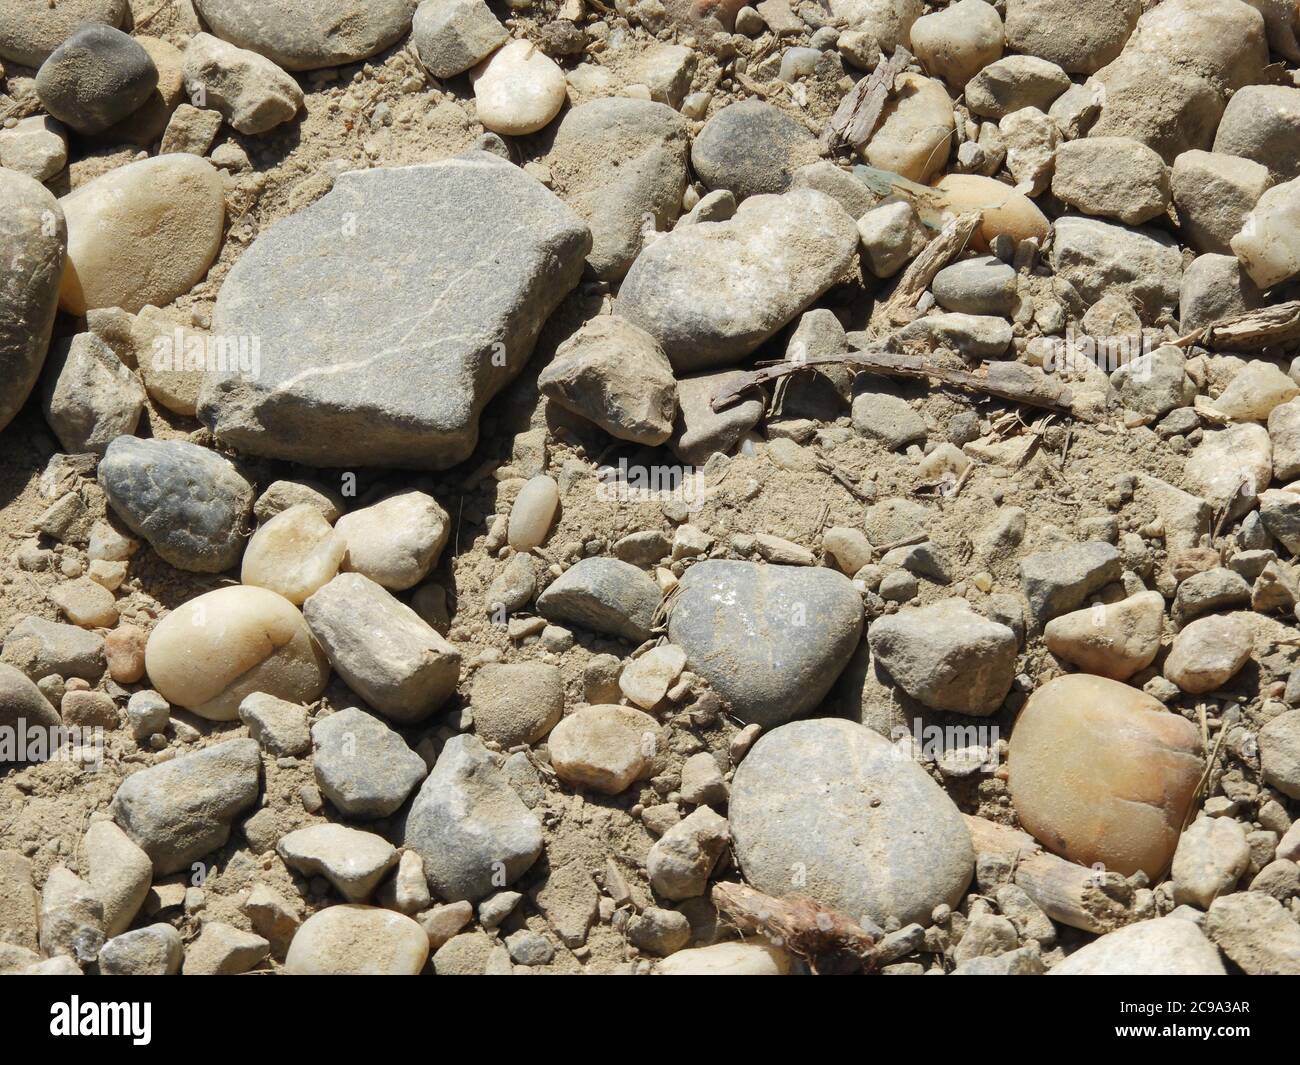 Top view of different shaped and sized rocks on a dirt floor Stock Photo